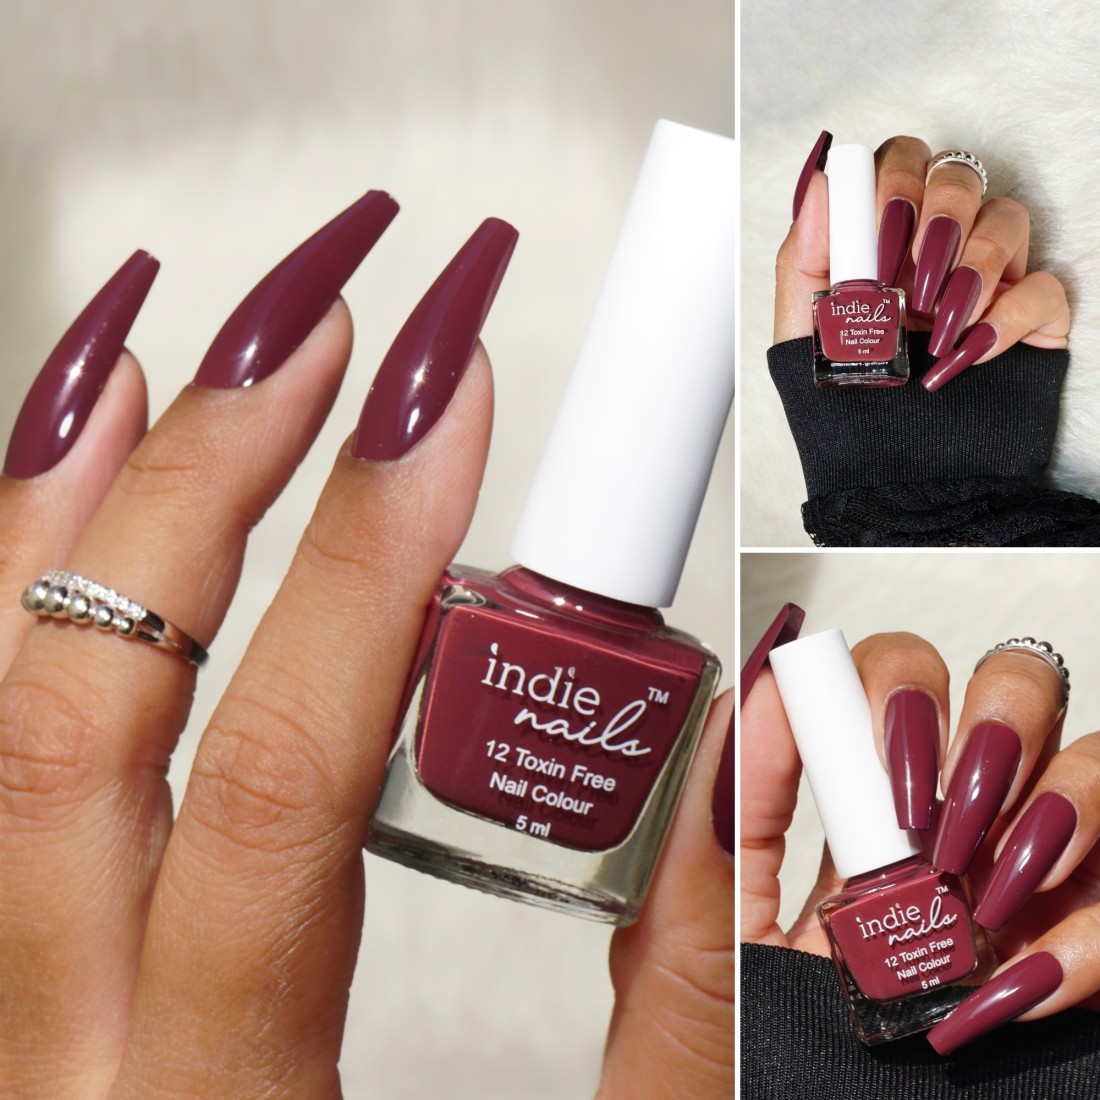 20 Burgundy Nail Ideas That Bring Autumn to Your Fingertips